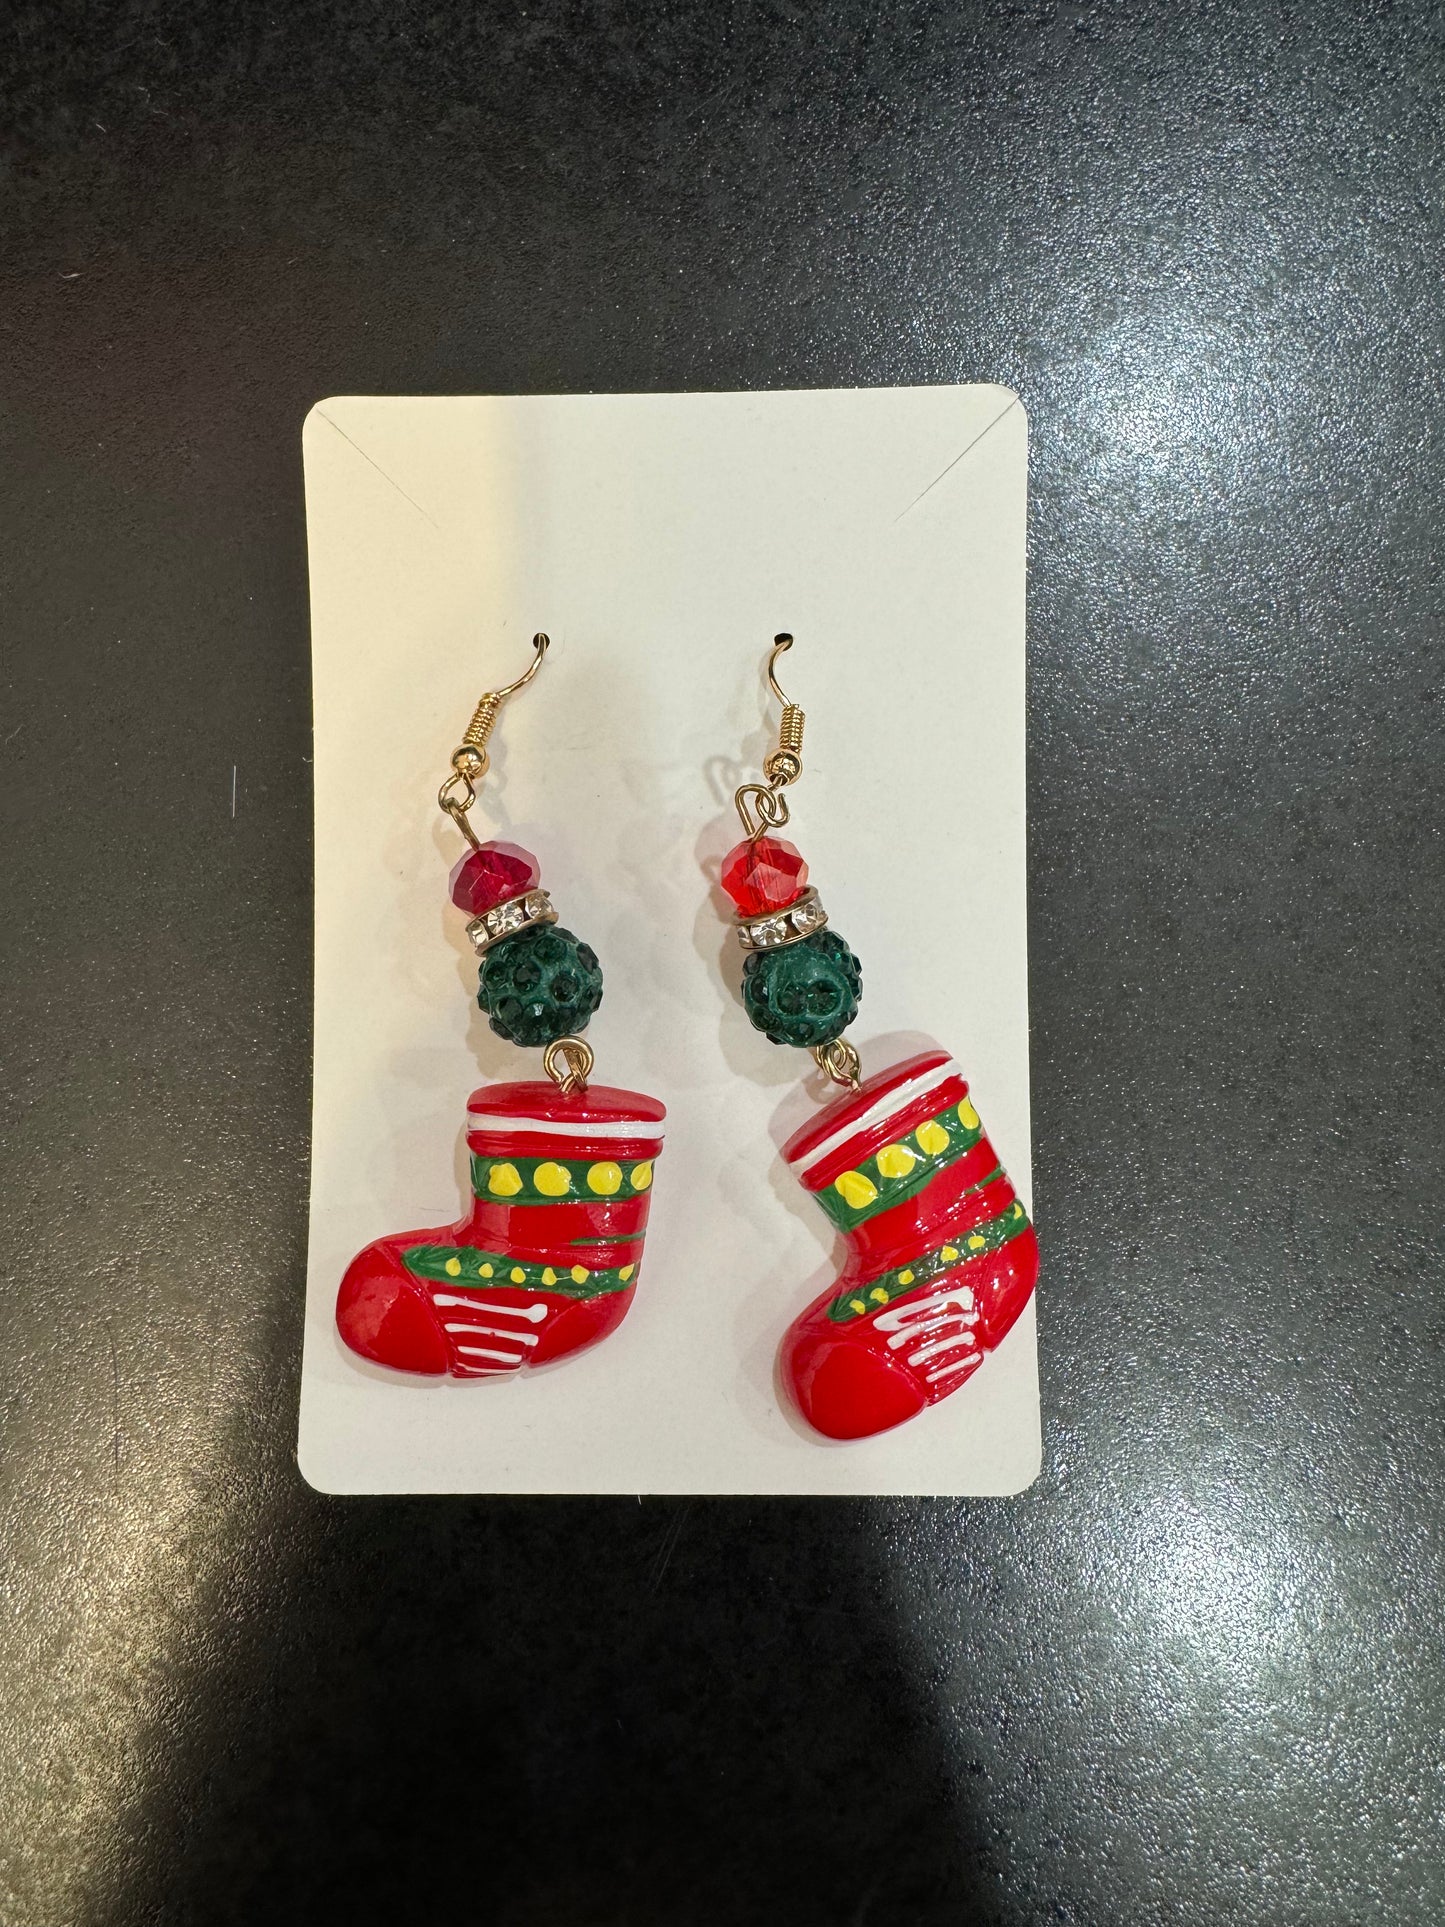 A pair of red and green Chickie Collective Stocking Earrings.